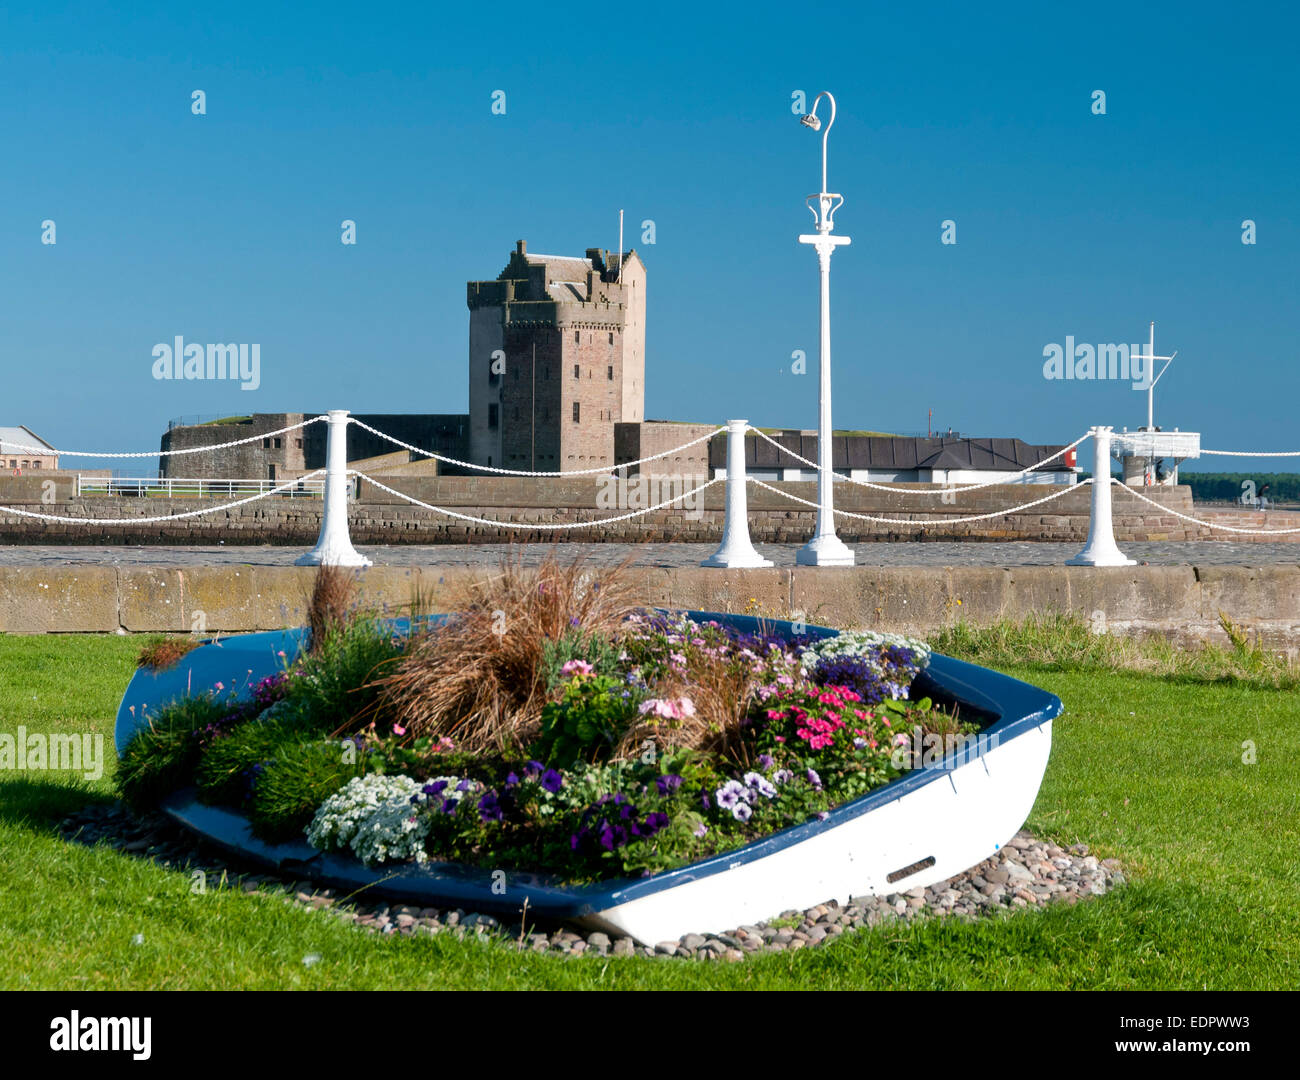 broughty ferry castle attraction historic  dinghy flower bed Stock Photo